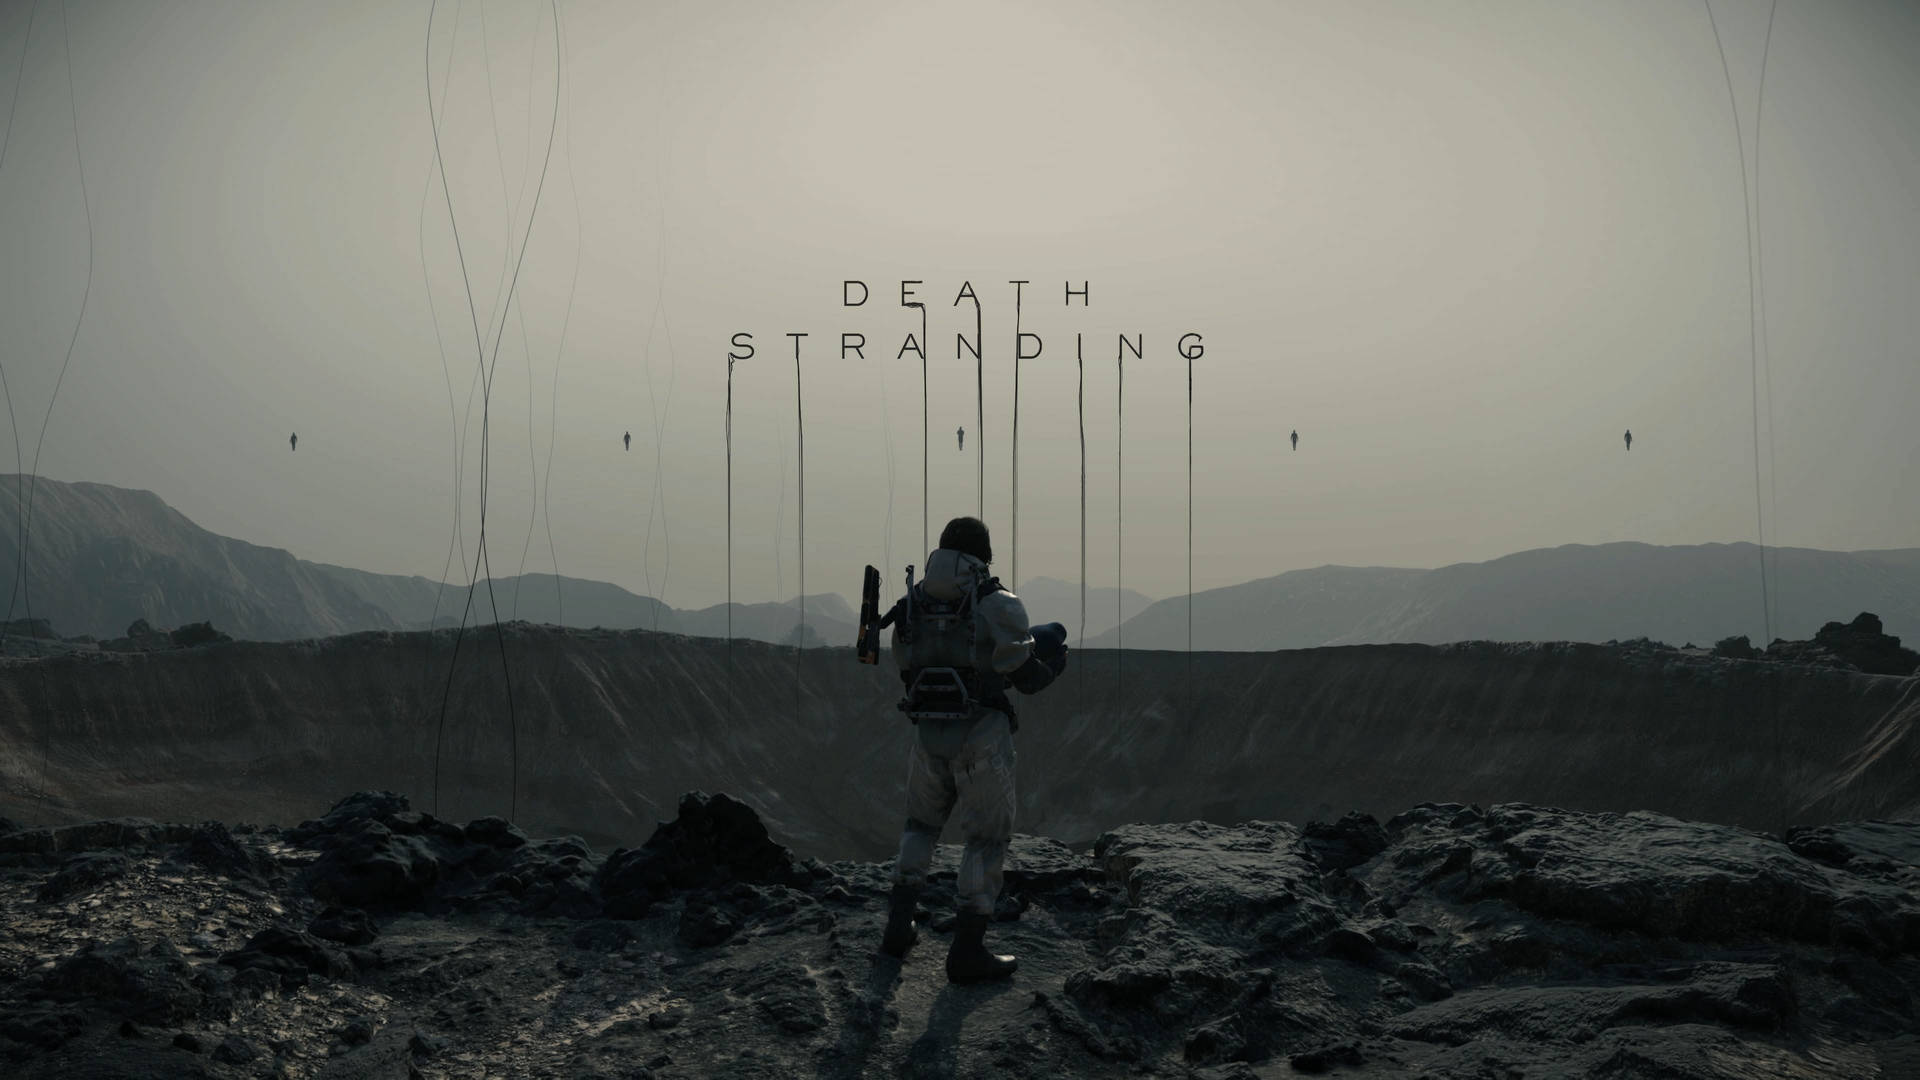 BT's On The Crater Death Stranding Wallpaper